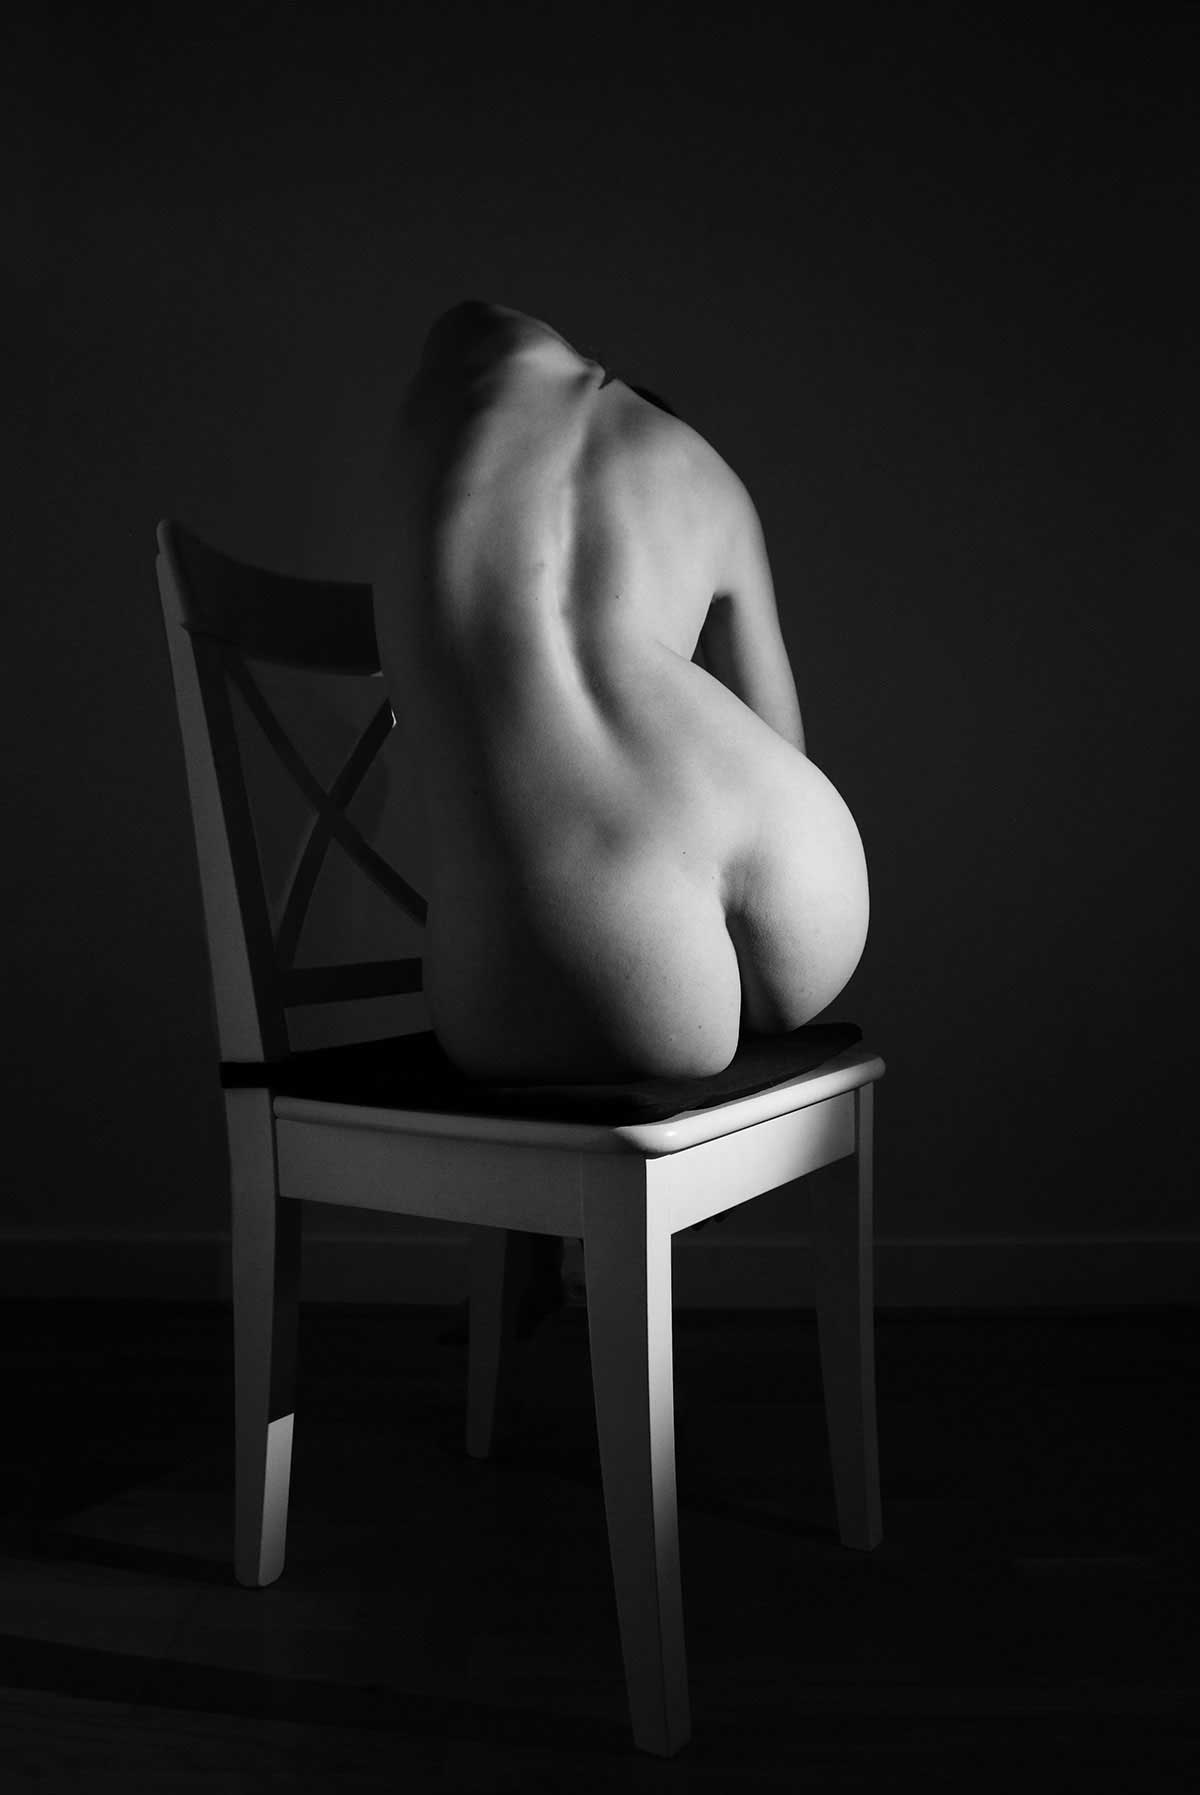 Erotic Asian Artistic Photography - Lucie Nechanicka ; Nude photography | Dodho Photography Magazine